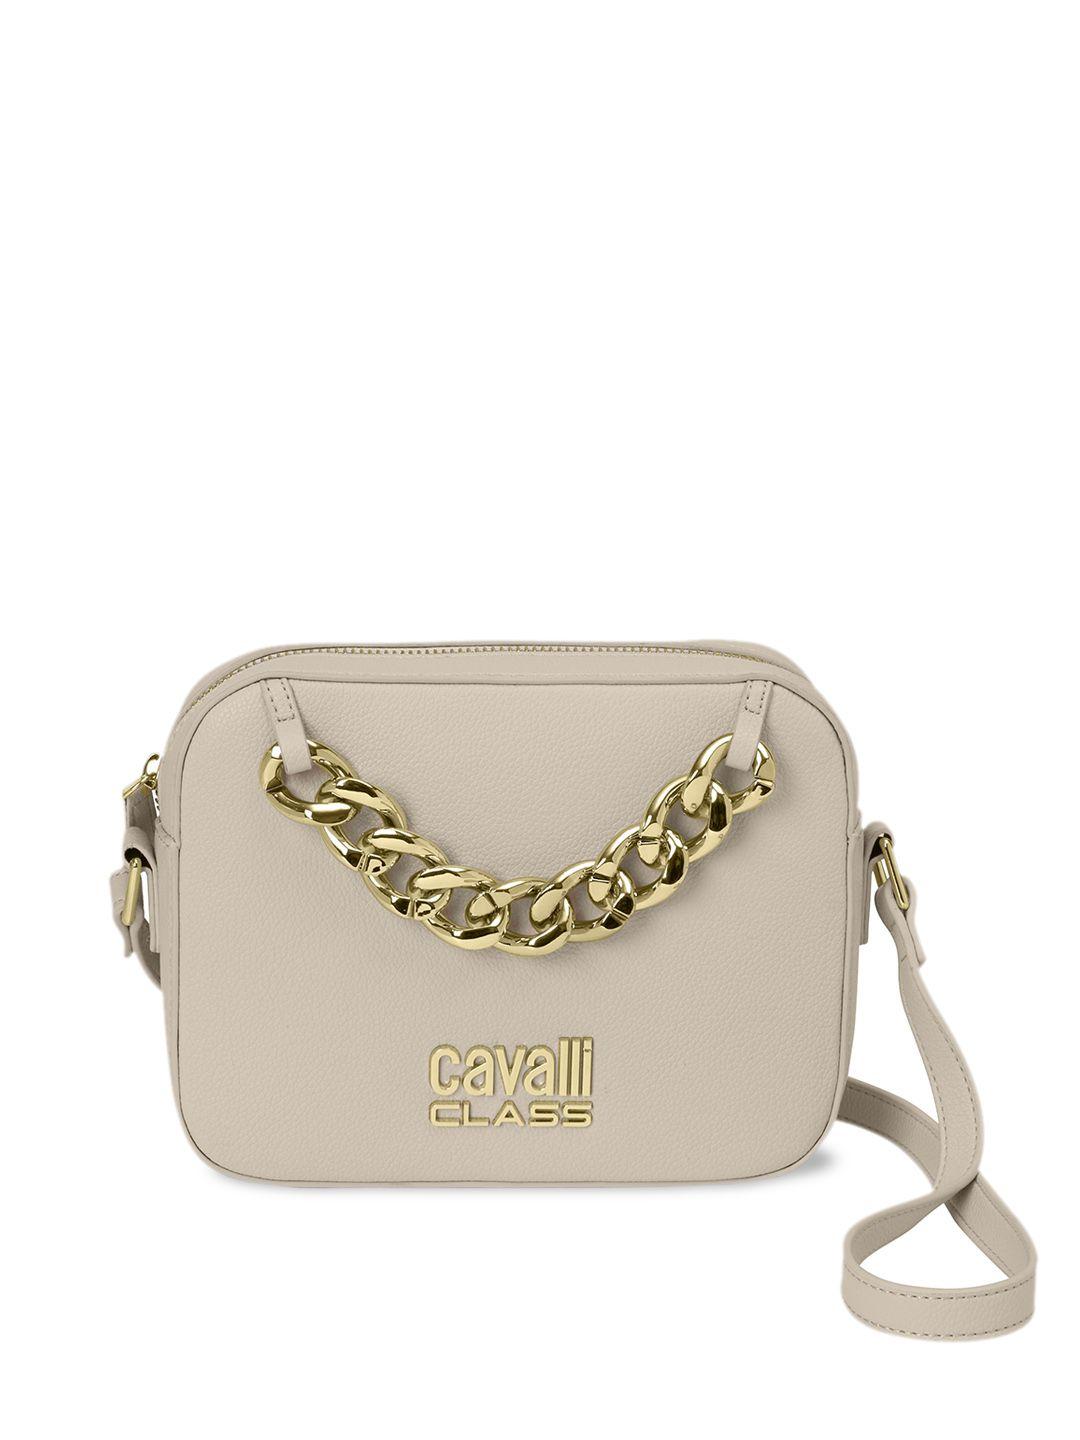 cavalli class structured sling bag